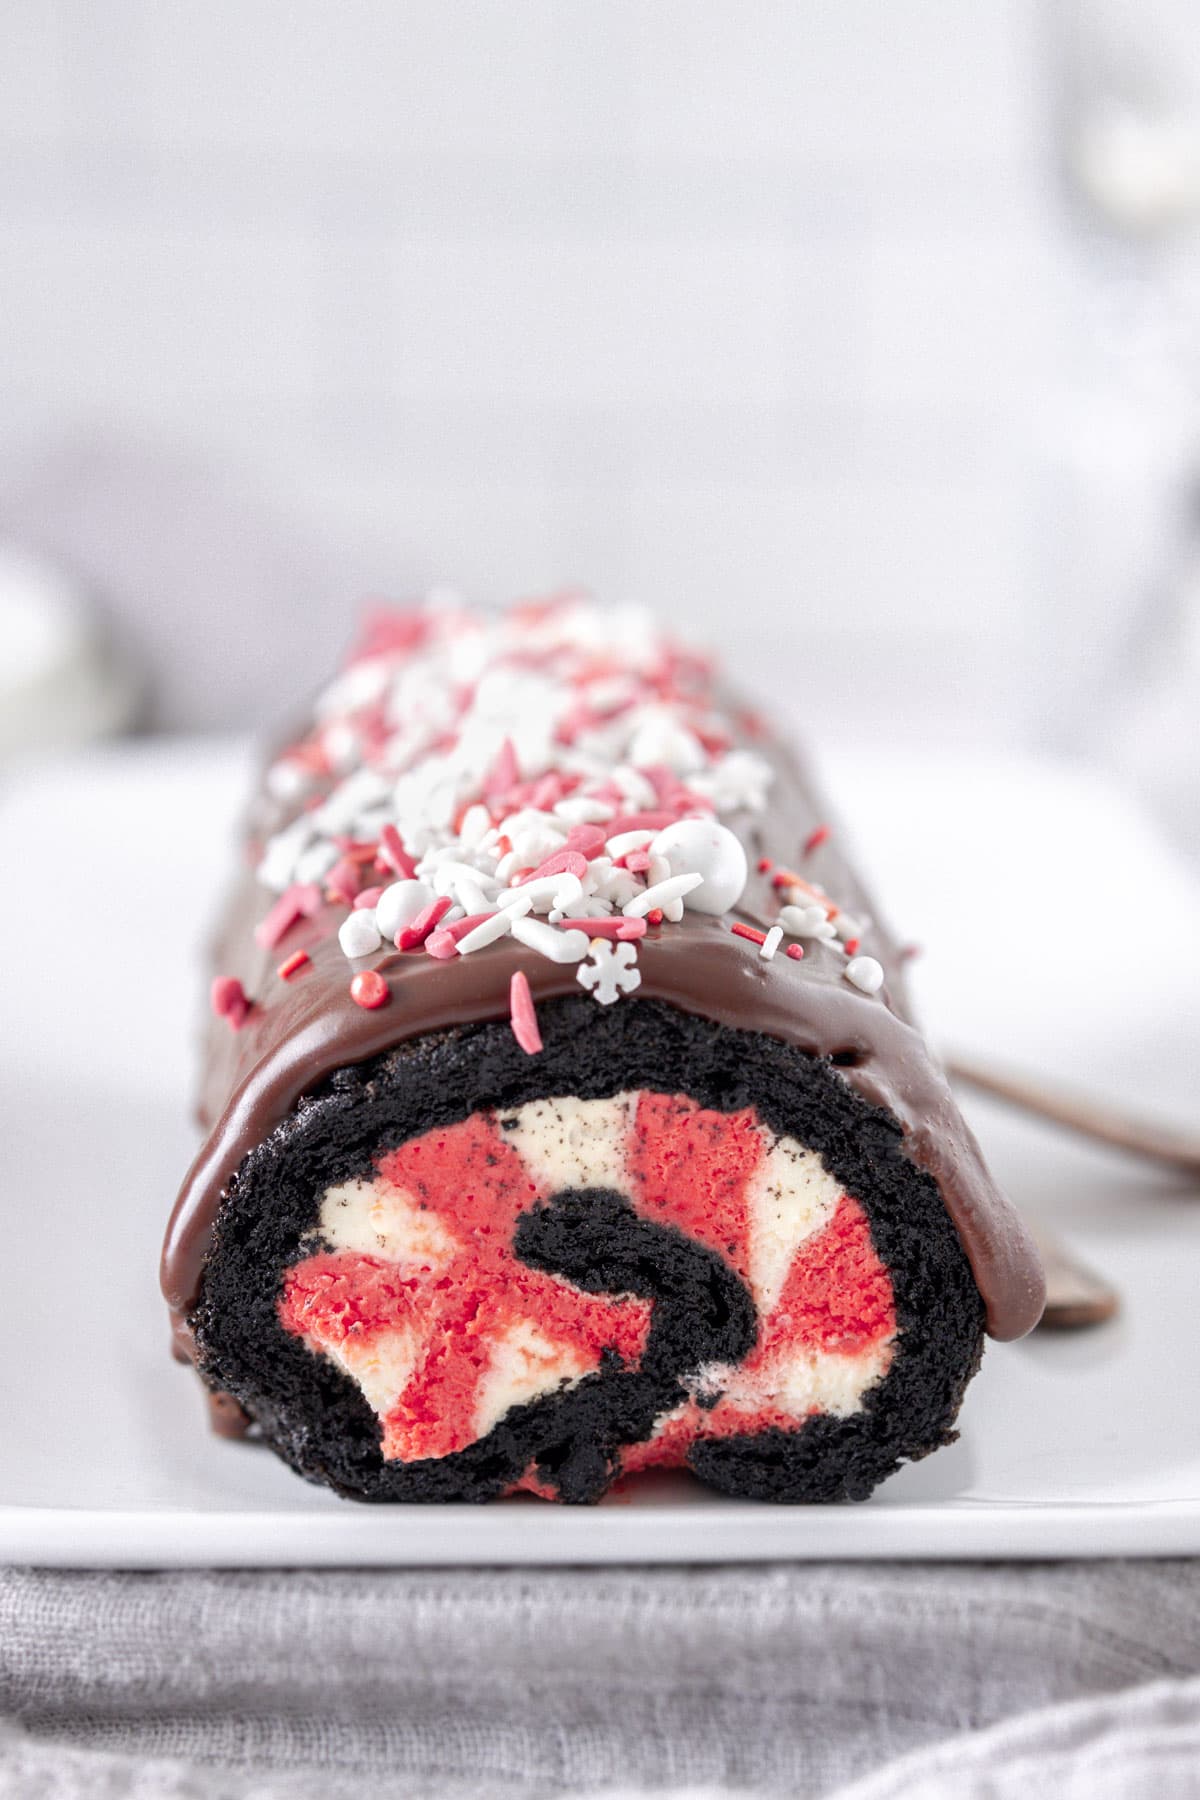 Chocolate Peppermint Swiss Roll filled with red and white cream, on a white plate